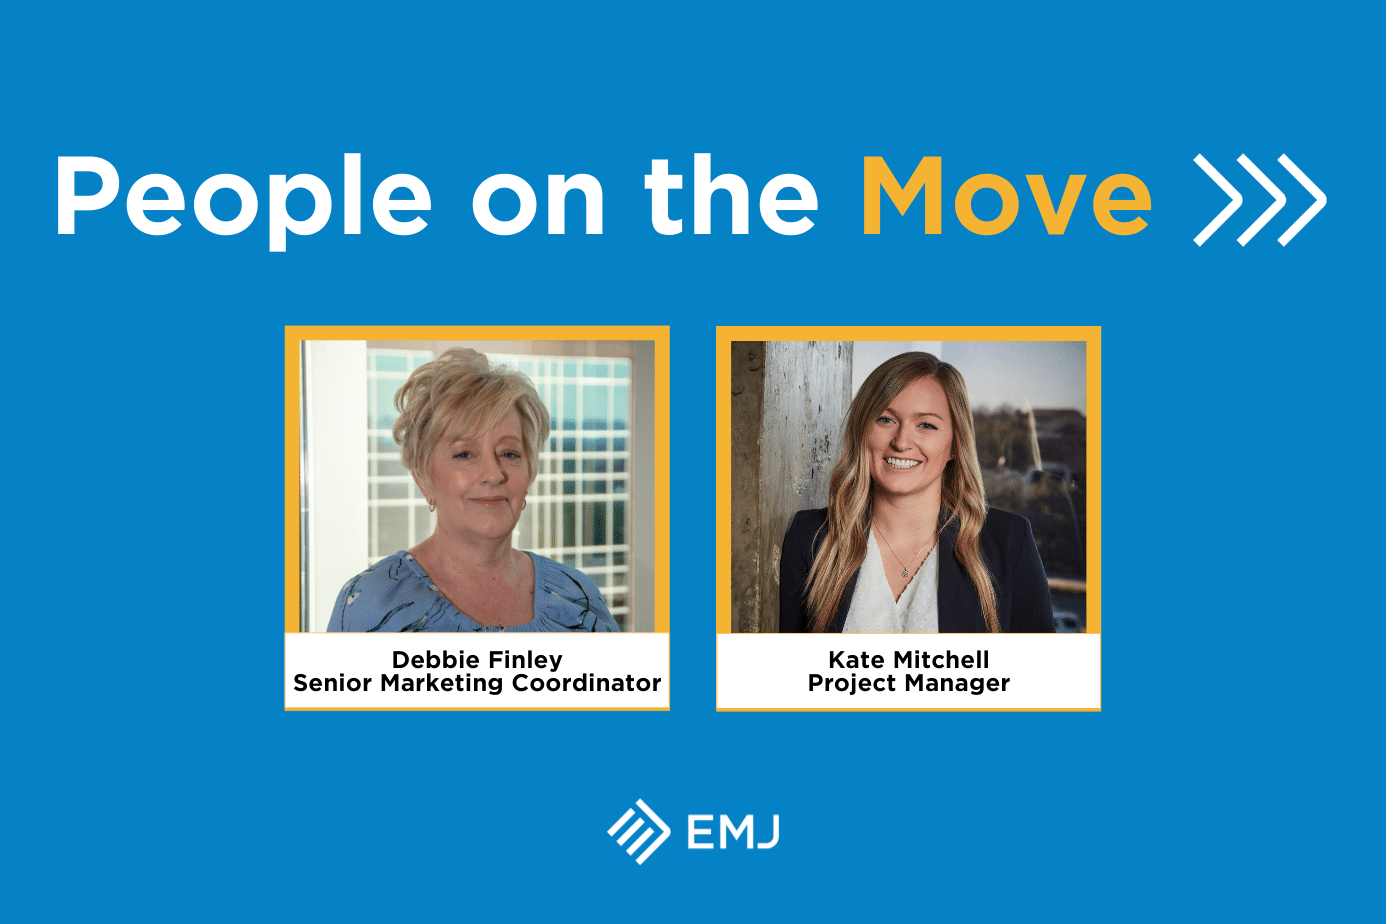 People on the Move: Debbie Finley and Kate Mitchell